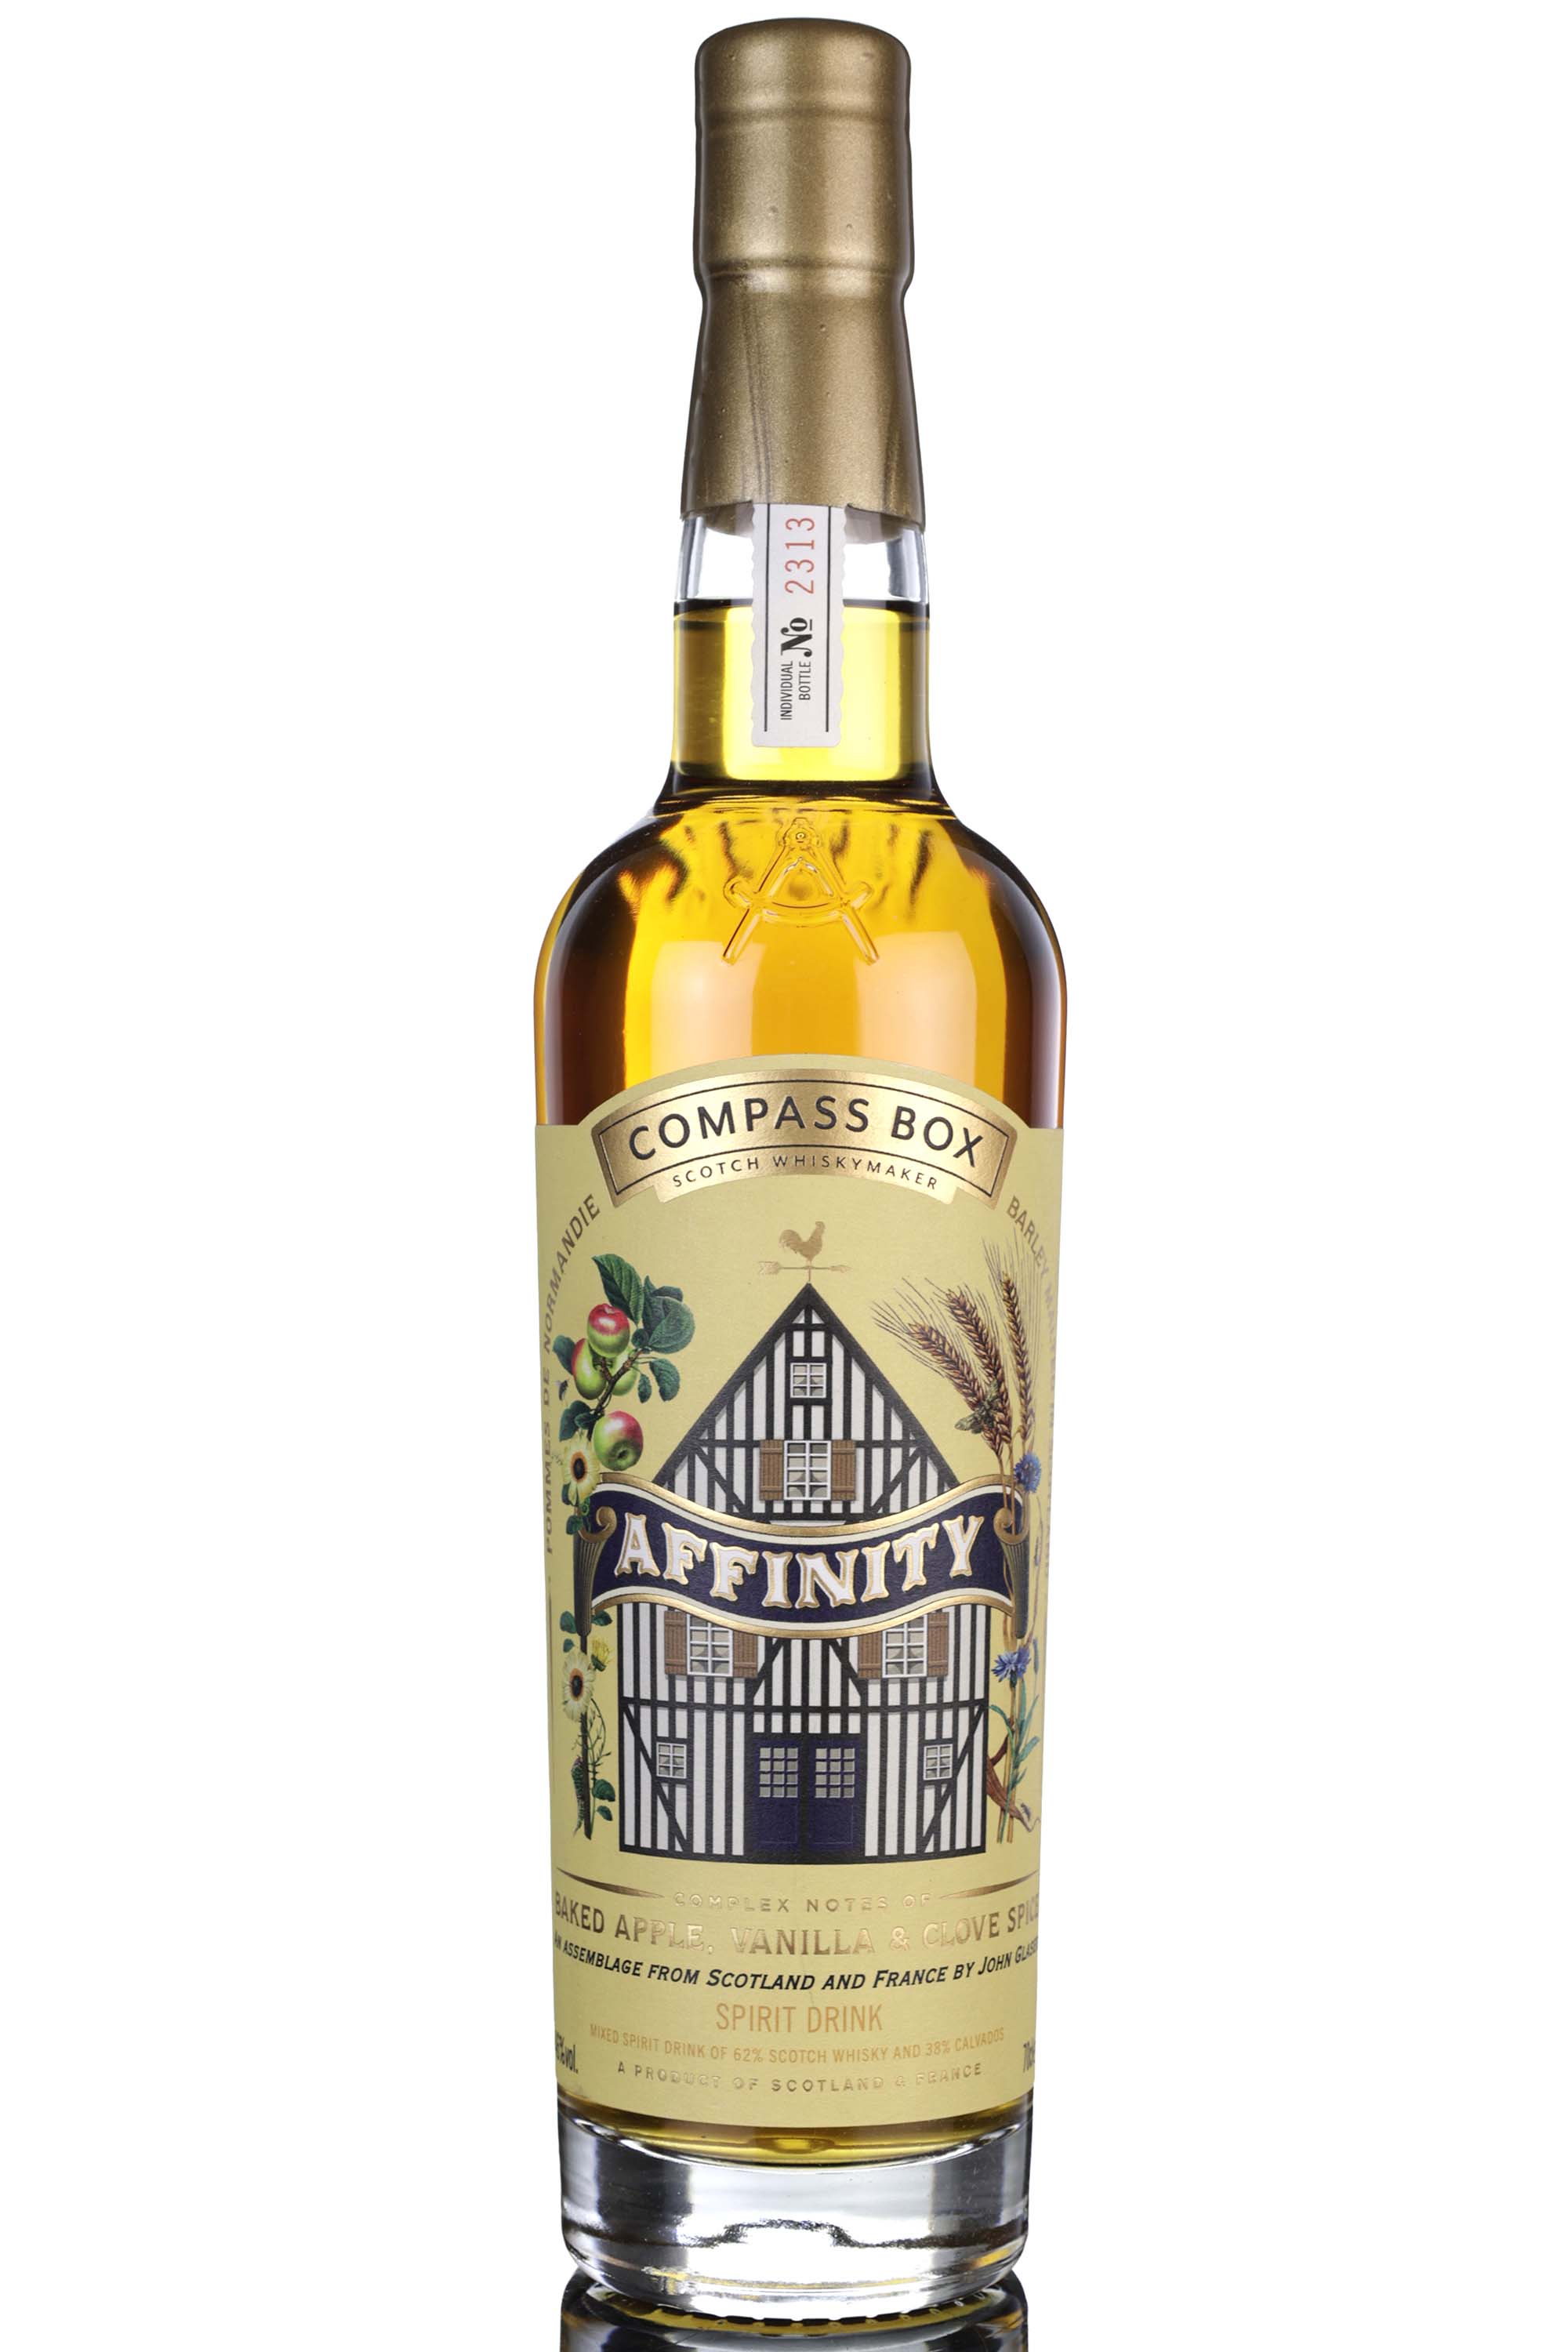 Compass Box Affinity - 2019 Release